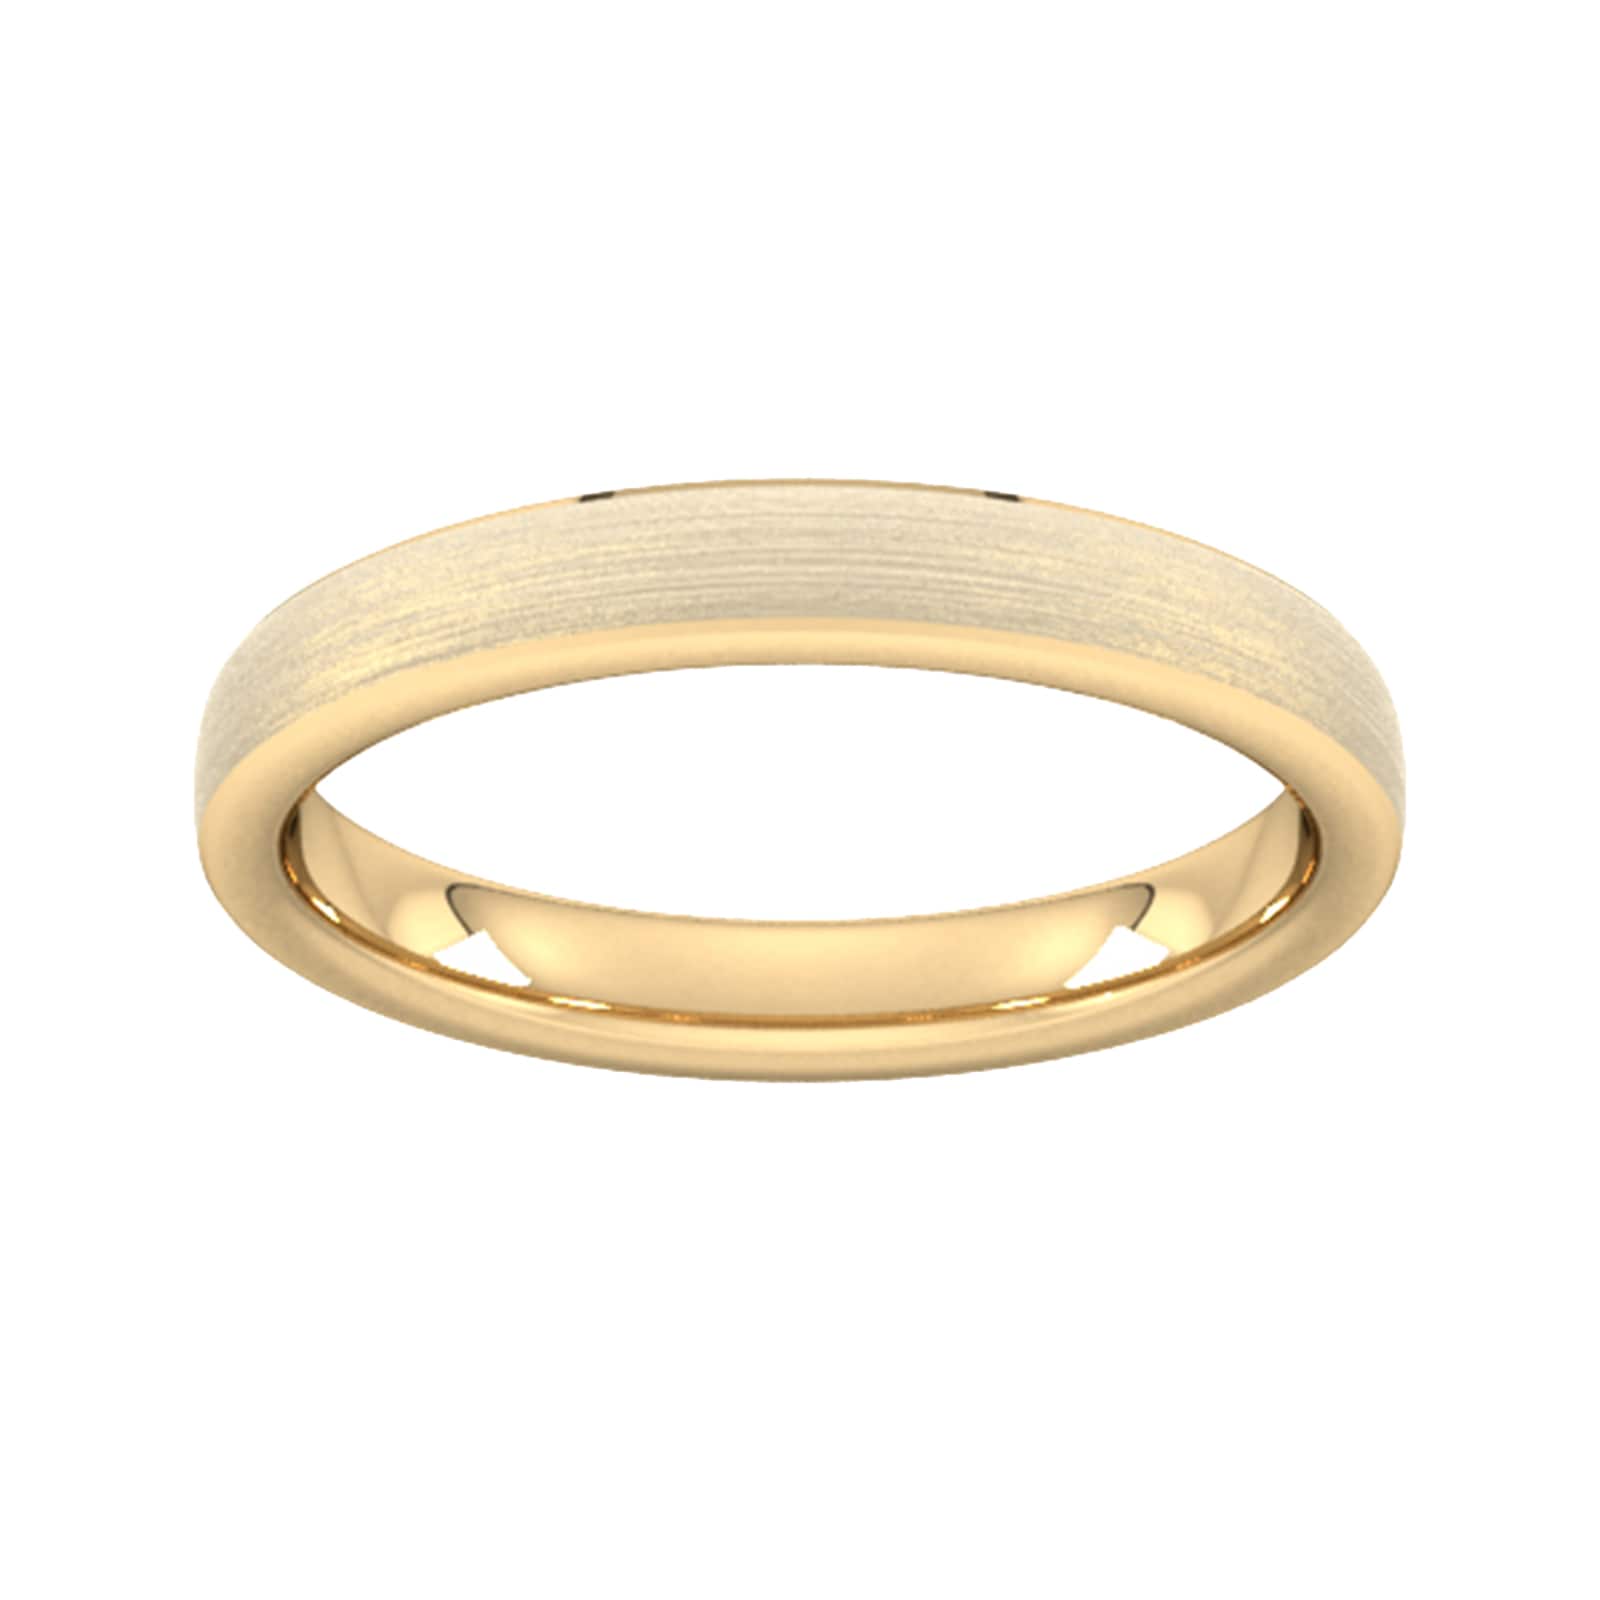 3mm D Shape Standard Polished Chamfered Edges With Matt Centre Wedding Ring In 9 Carat Yellow Gold - Ring Size Y